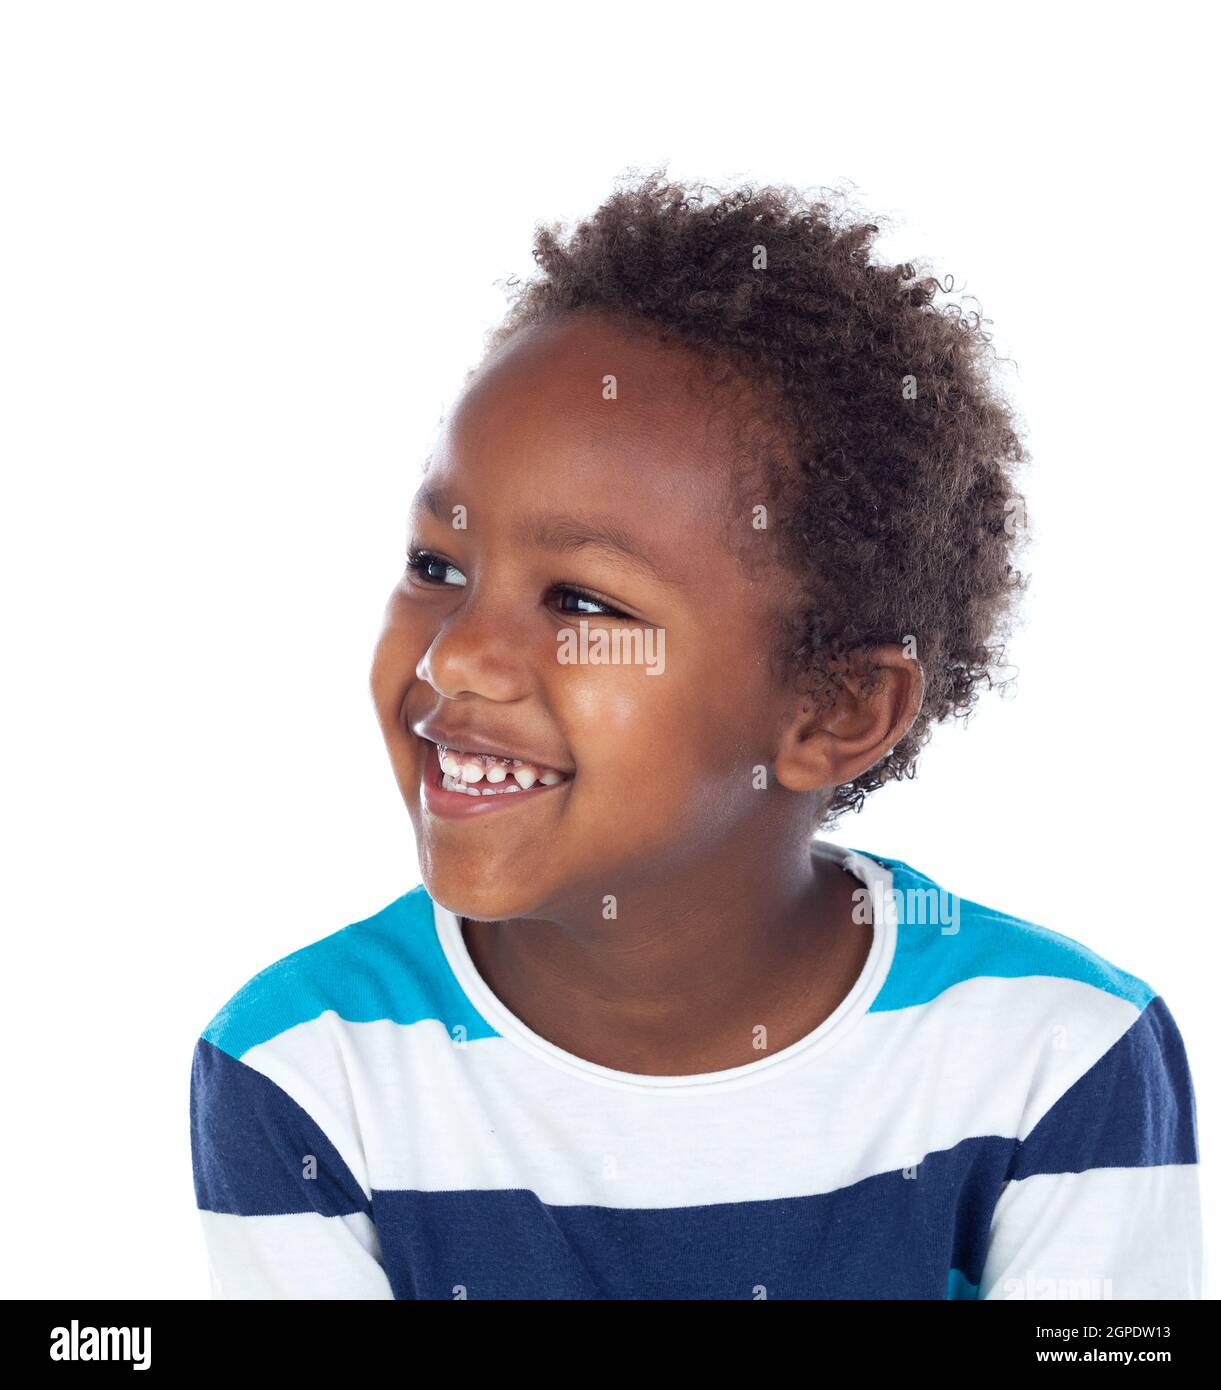 African child laughing isolated on white background Stock Photo